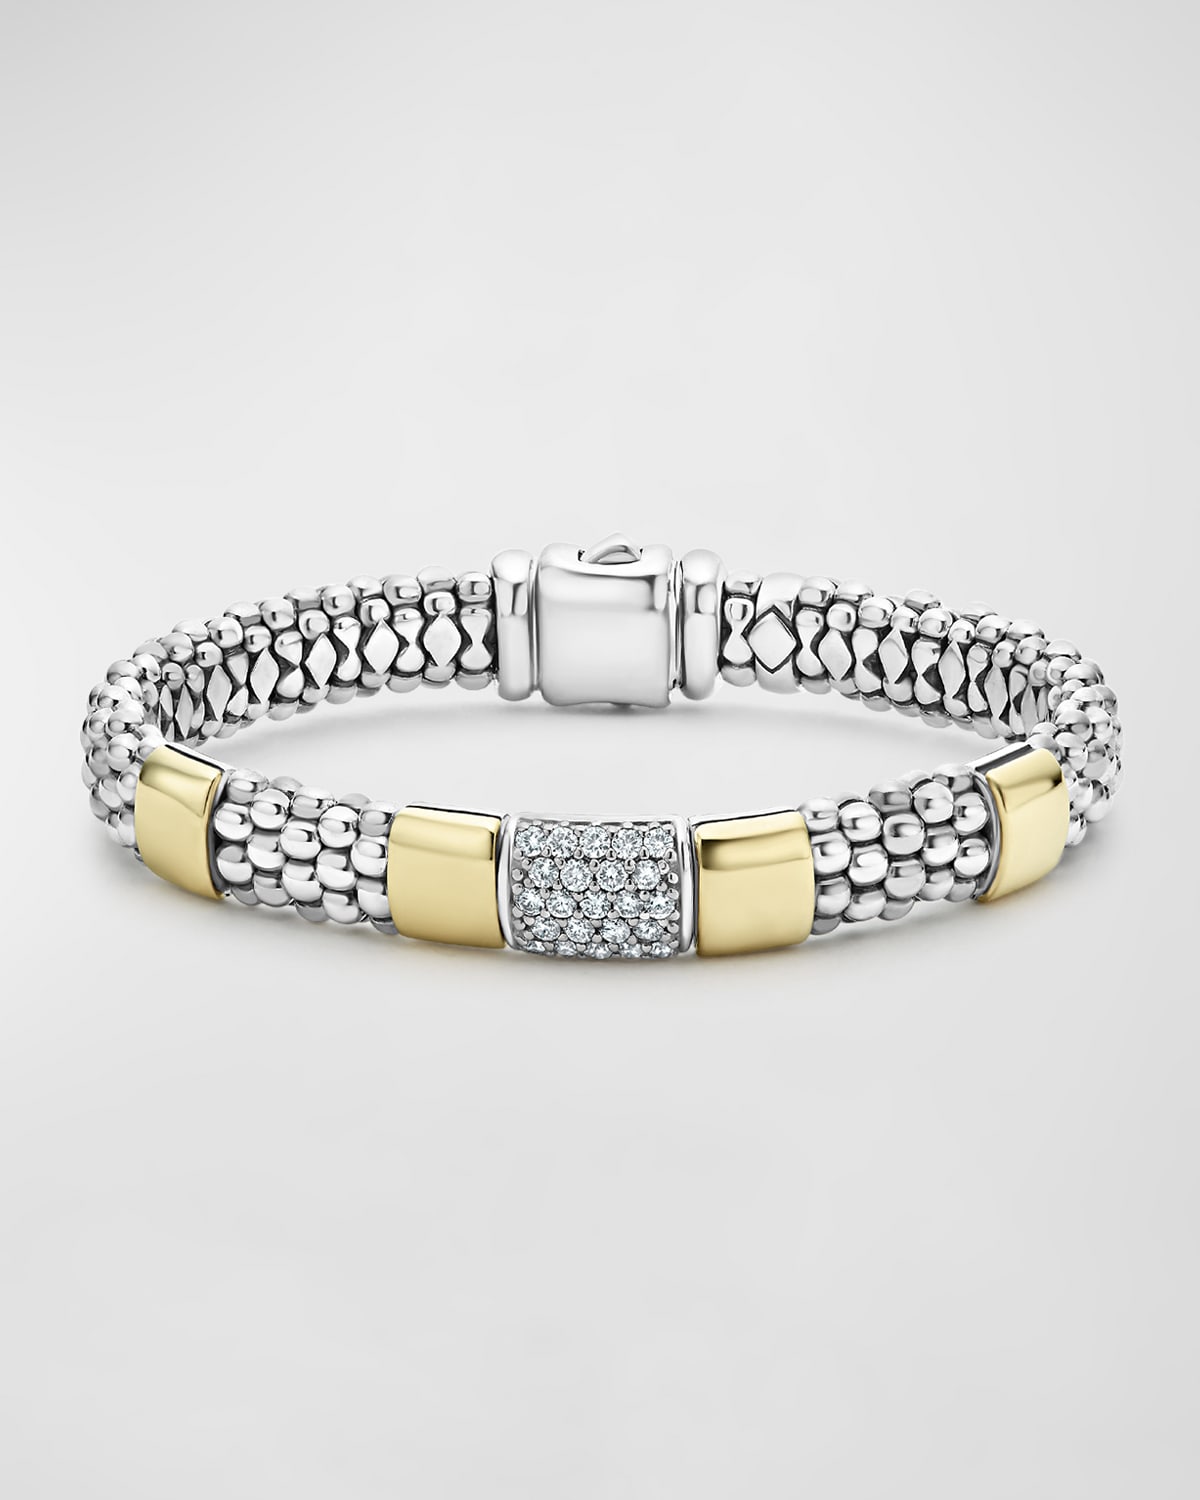 Diamond and Smooth Station Bracelet in 18K Gold with Sterling Silver Caviar Beading